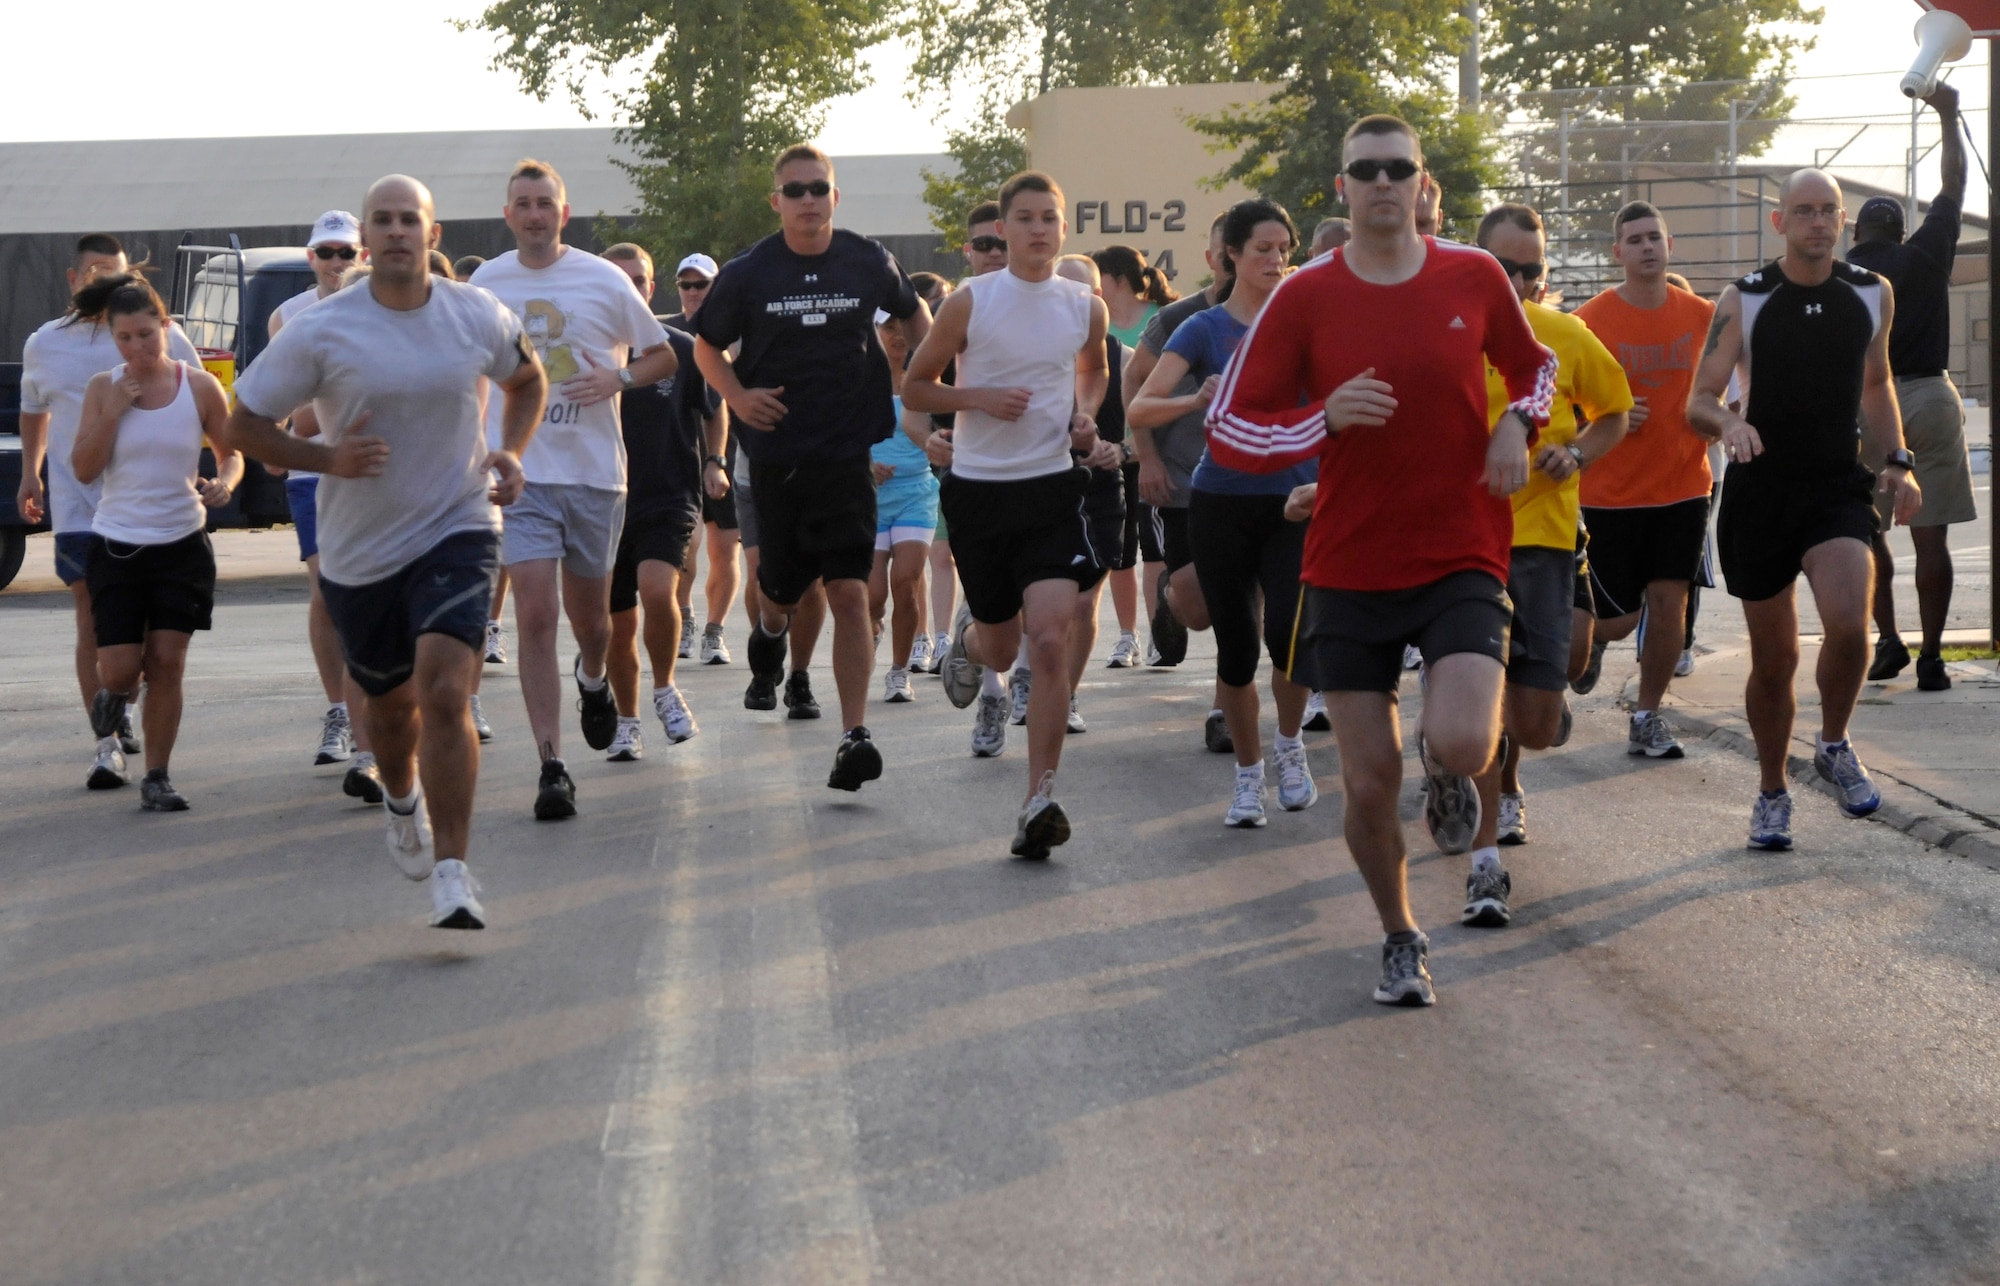 Airmen from Incirlik Air Base, Turkey, begin the 5k Poker Run Saturday, Aug. 8, 2009. Participants picked up a single card from each of the five points throughout the run, aiming for the best “poker hand” to win a prize. (U.S. Air Force photo/Airman 1st Class Amber Ashcraft)